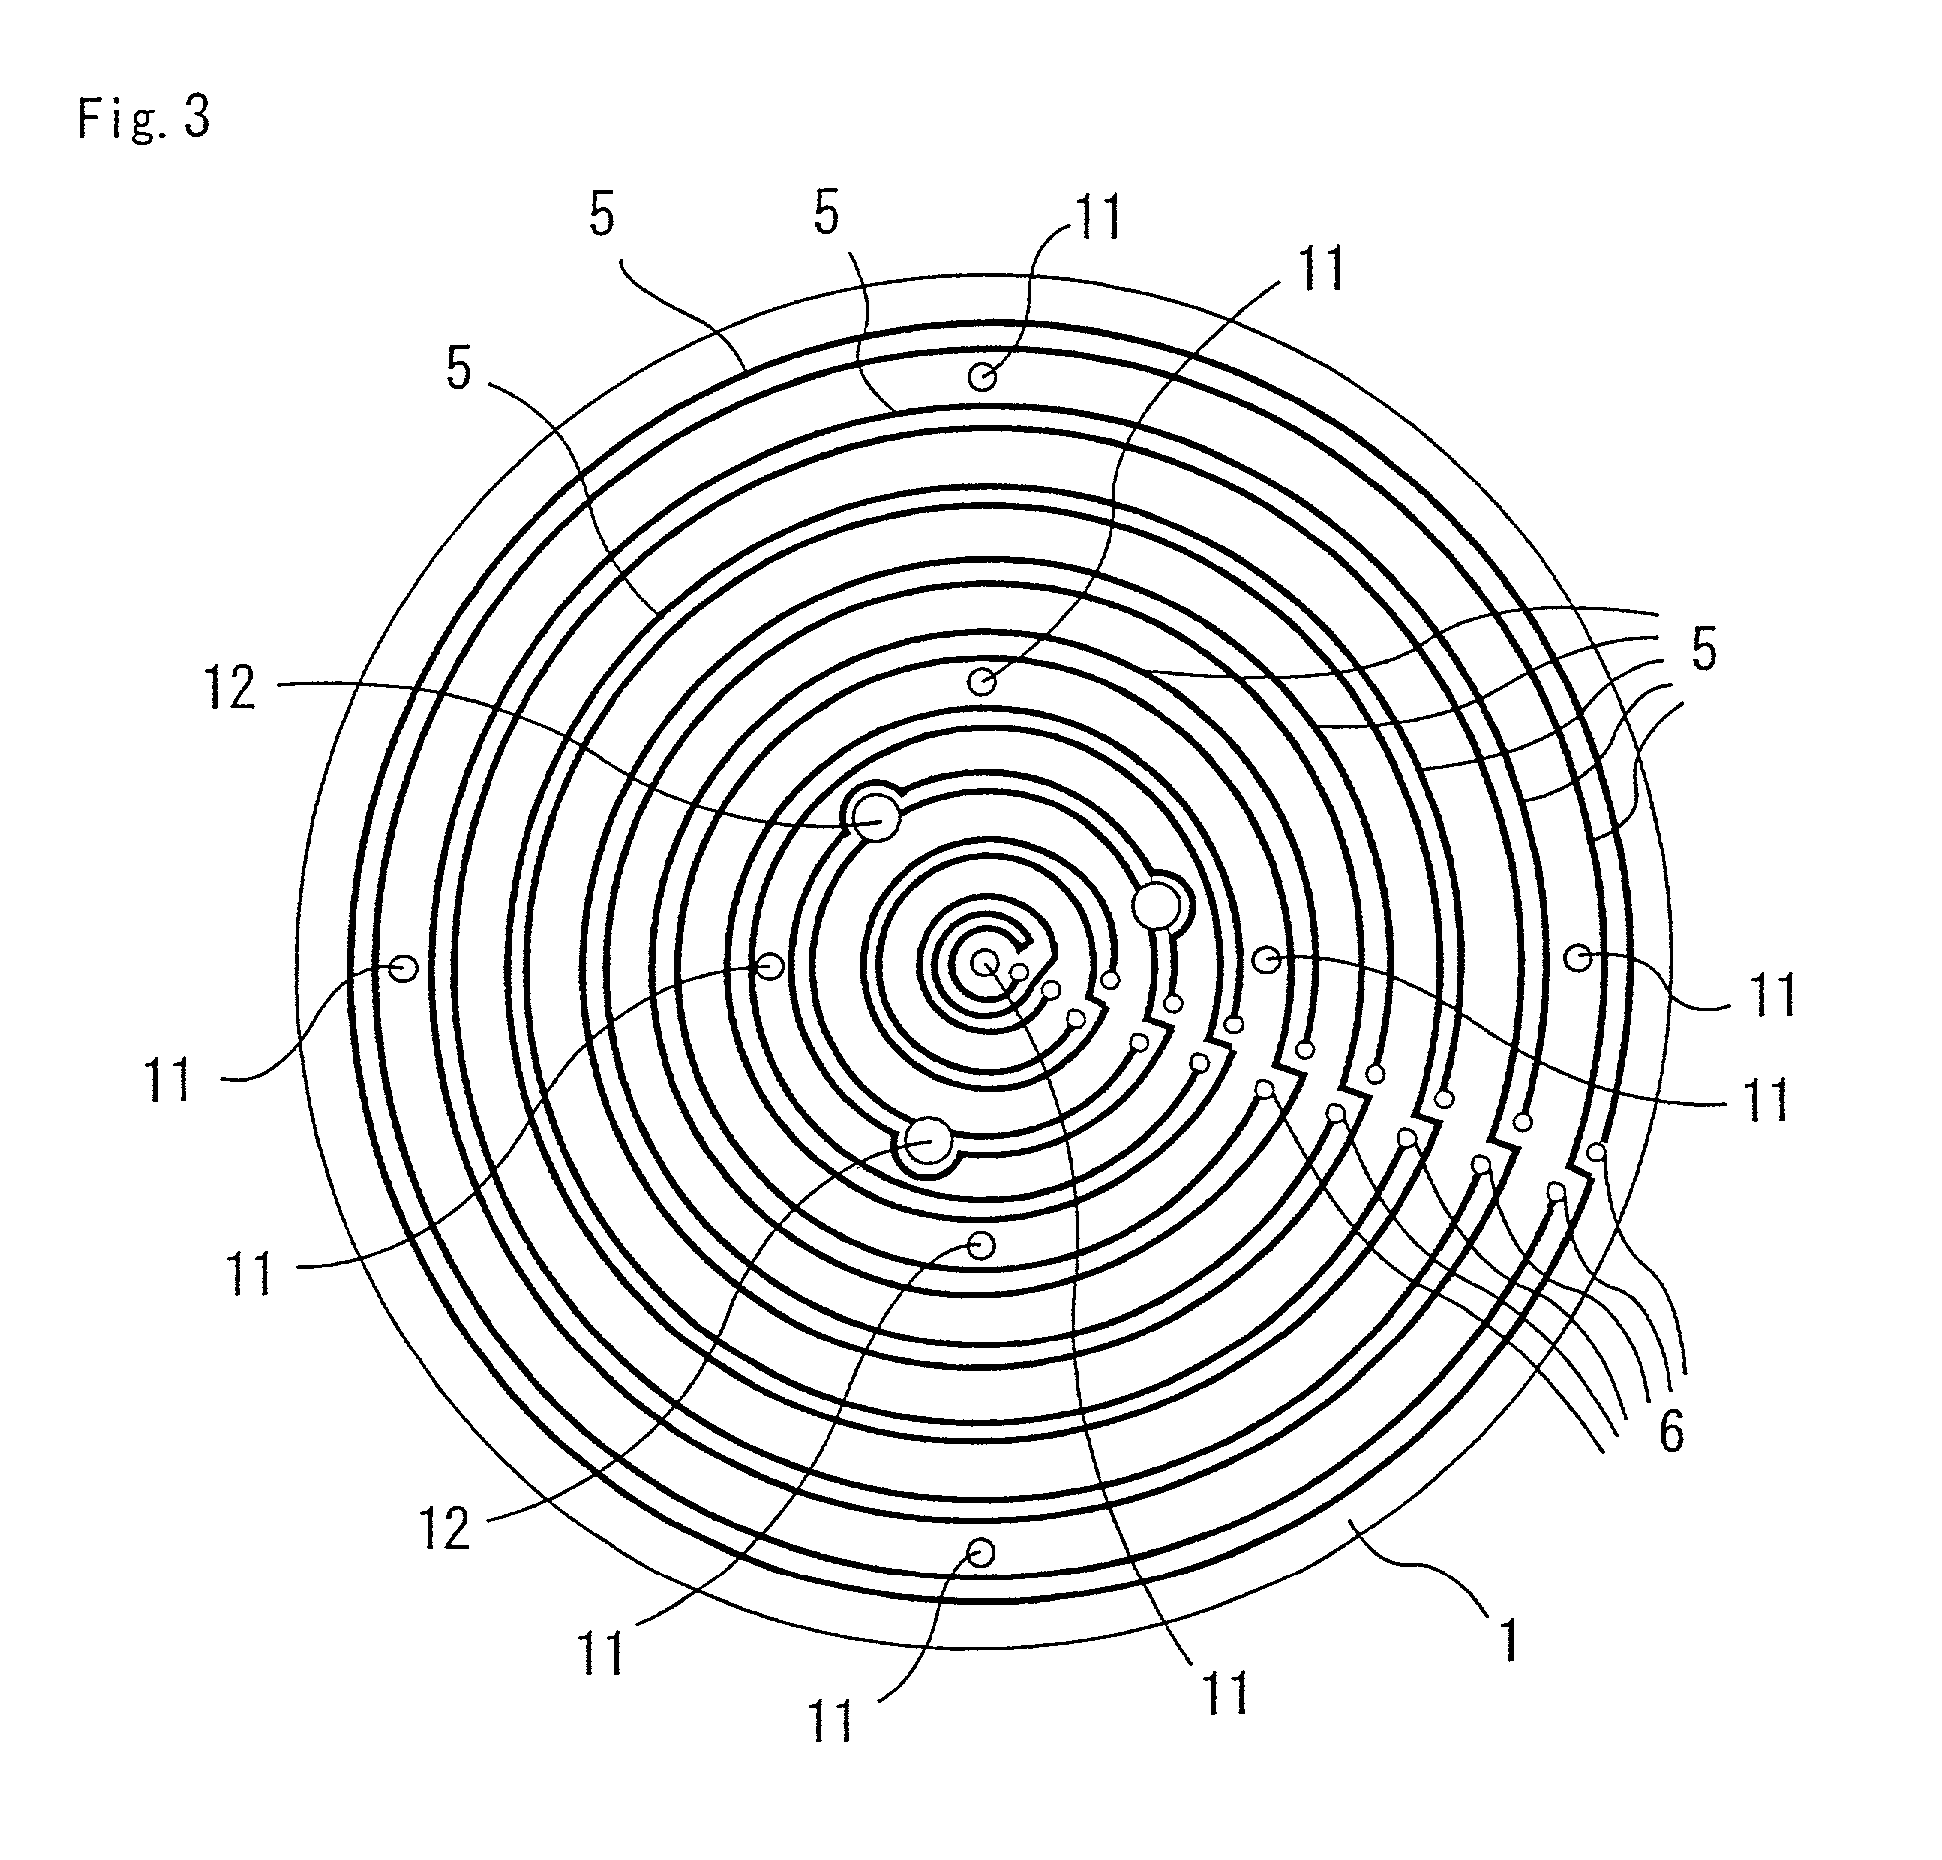 Ceramic substrate for semiconductor production and inspection devices